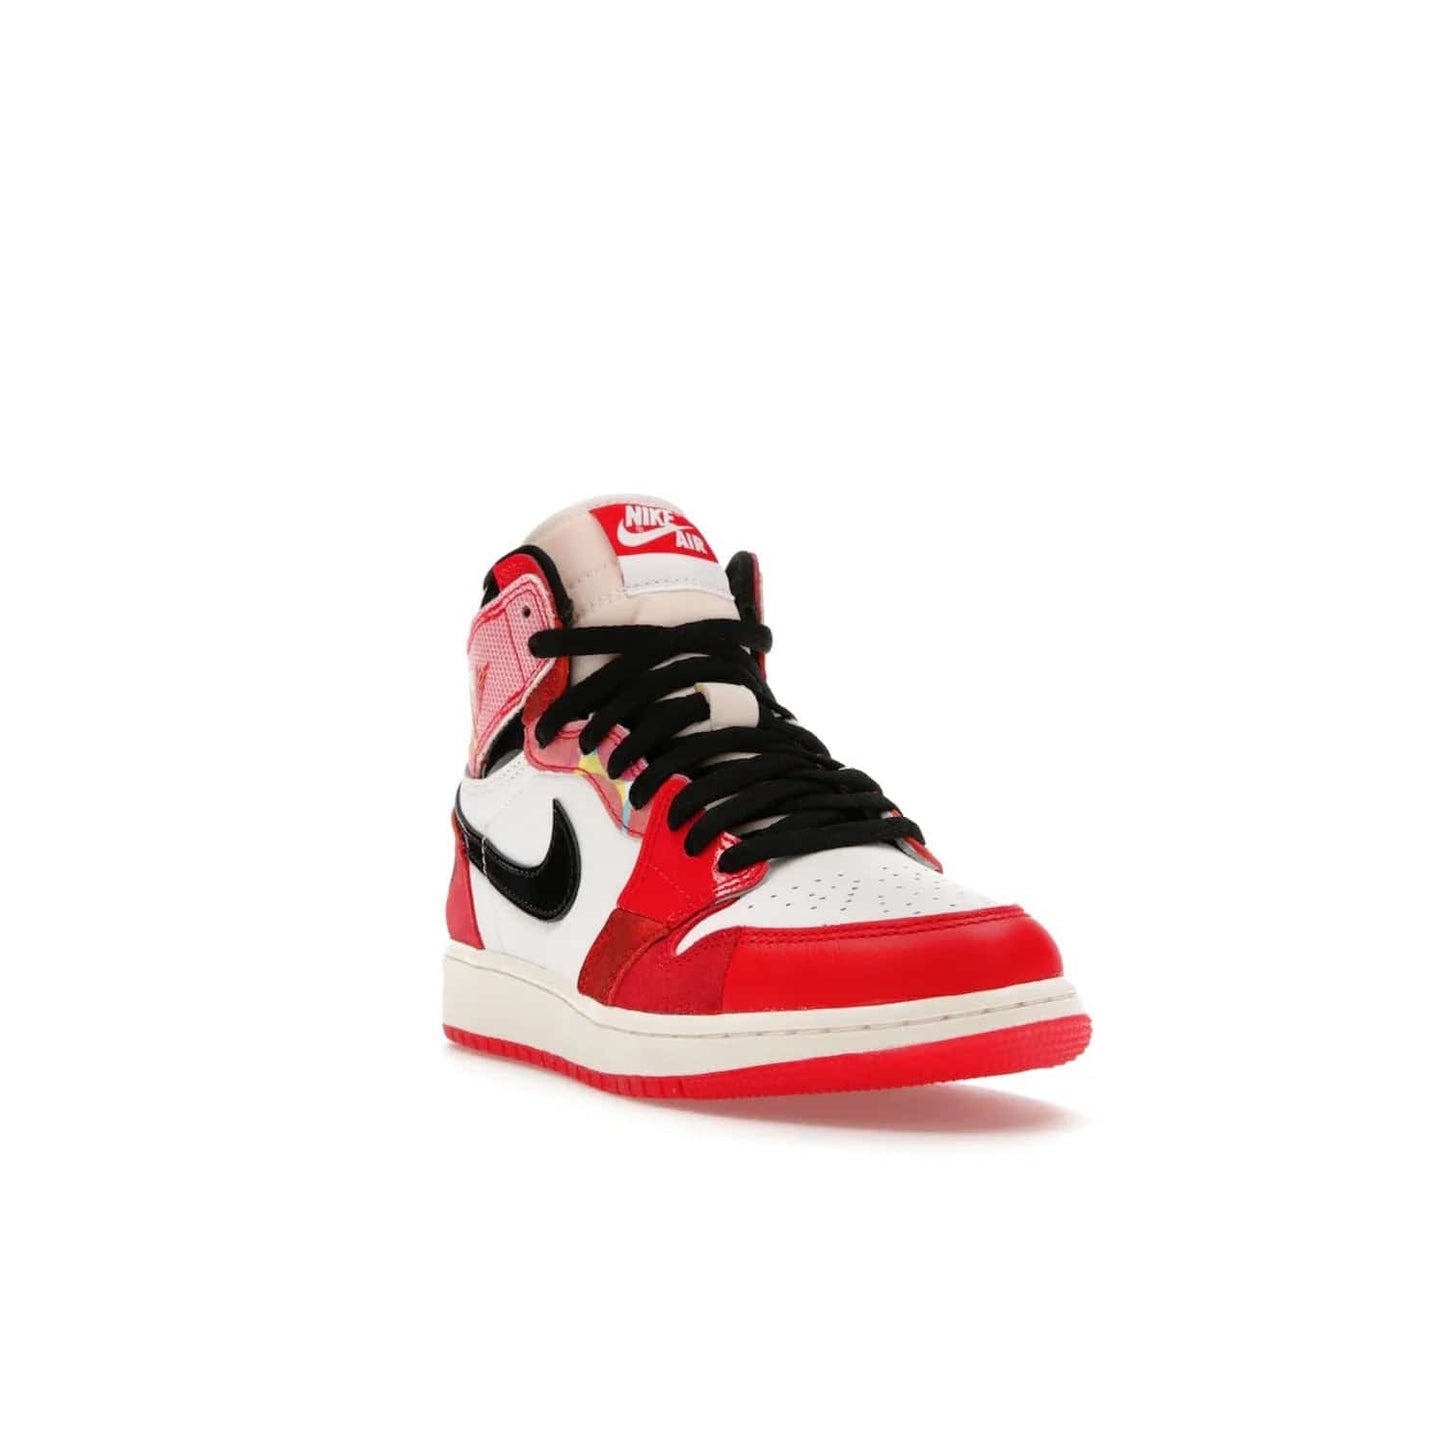 Jordan 1 High OG Spider-Man Across the Spider-Verse (GS) - Image 7 - Only at www.BallersClubKickz.com - Iconic basketball style Jordan 1 High OG Spider-Man Across the Spider-Verse hits the streets May 20th. University Red, Black, and White colorblocking and sleek design will make this shoe a must-have.